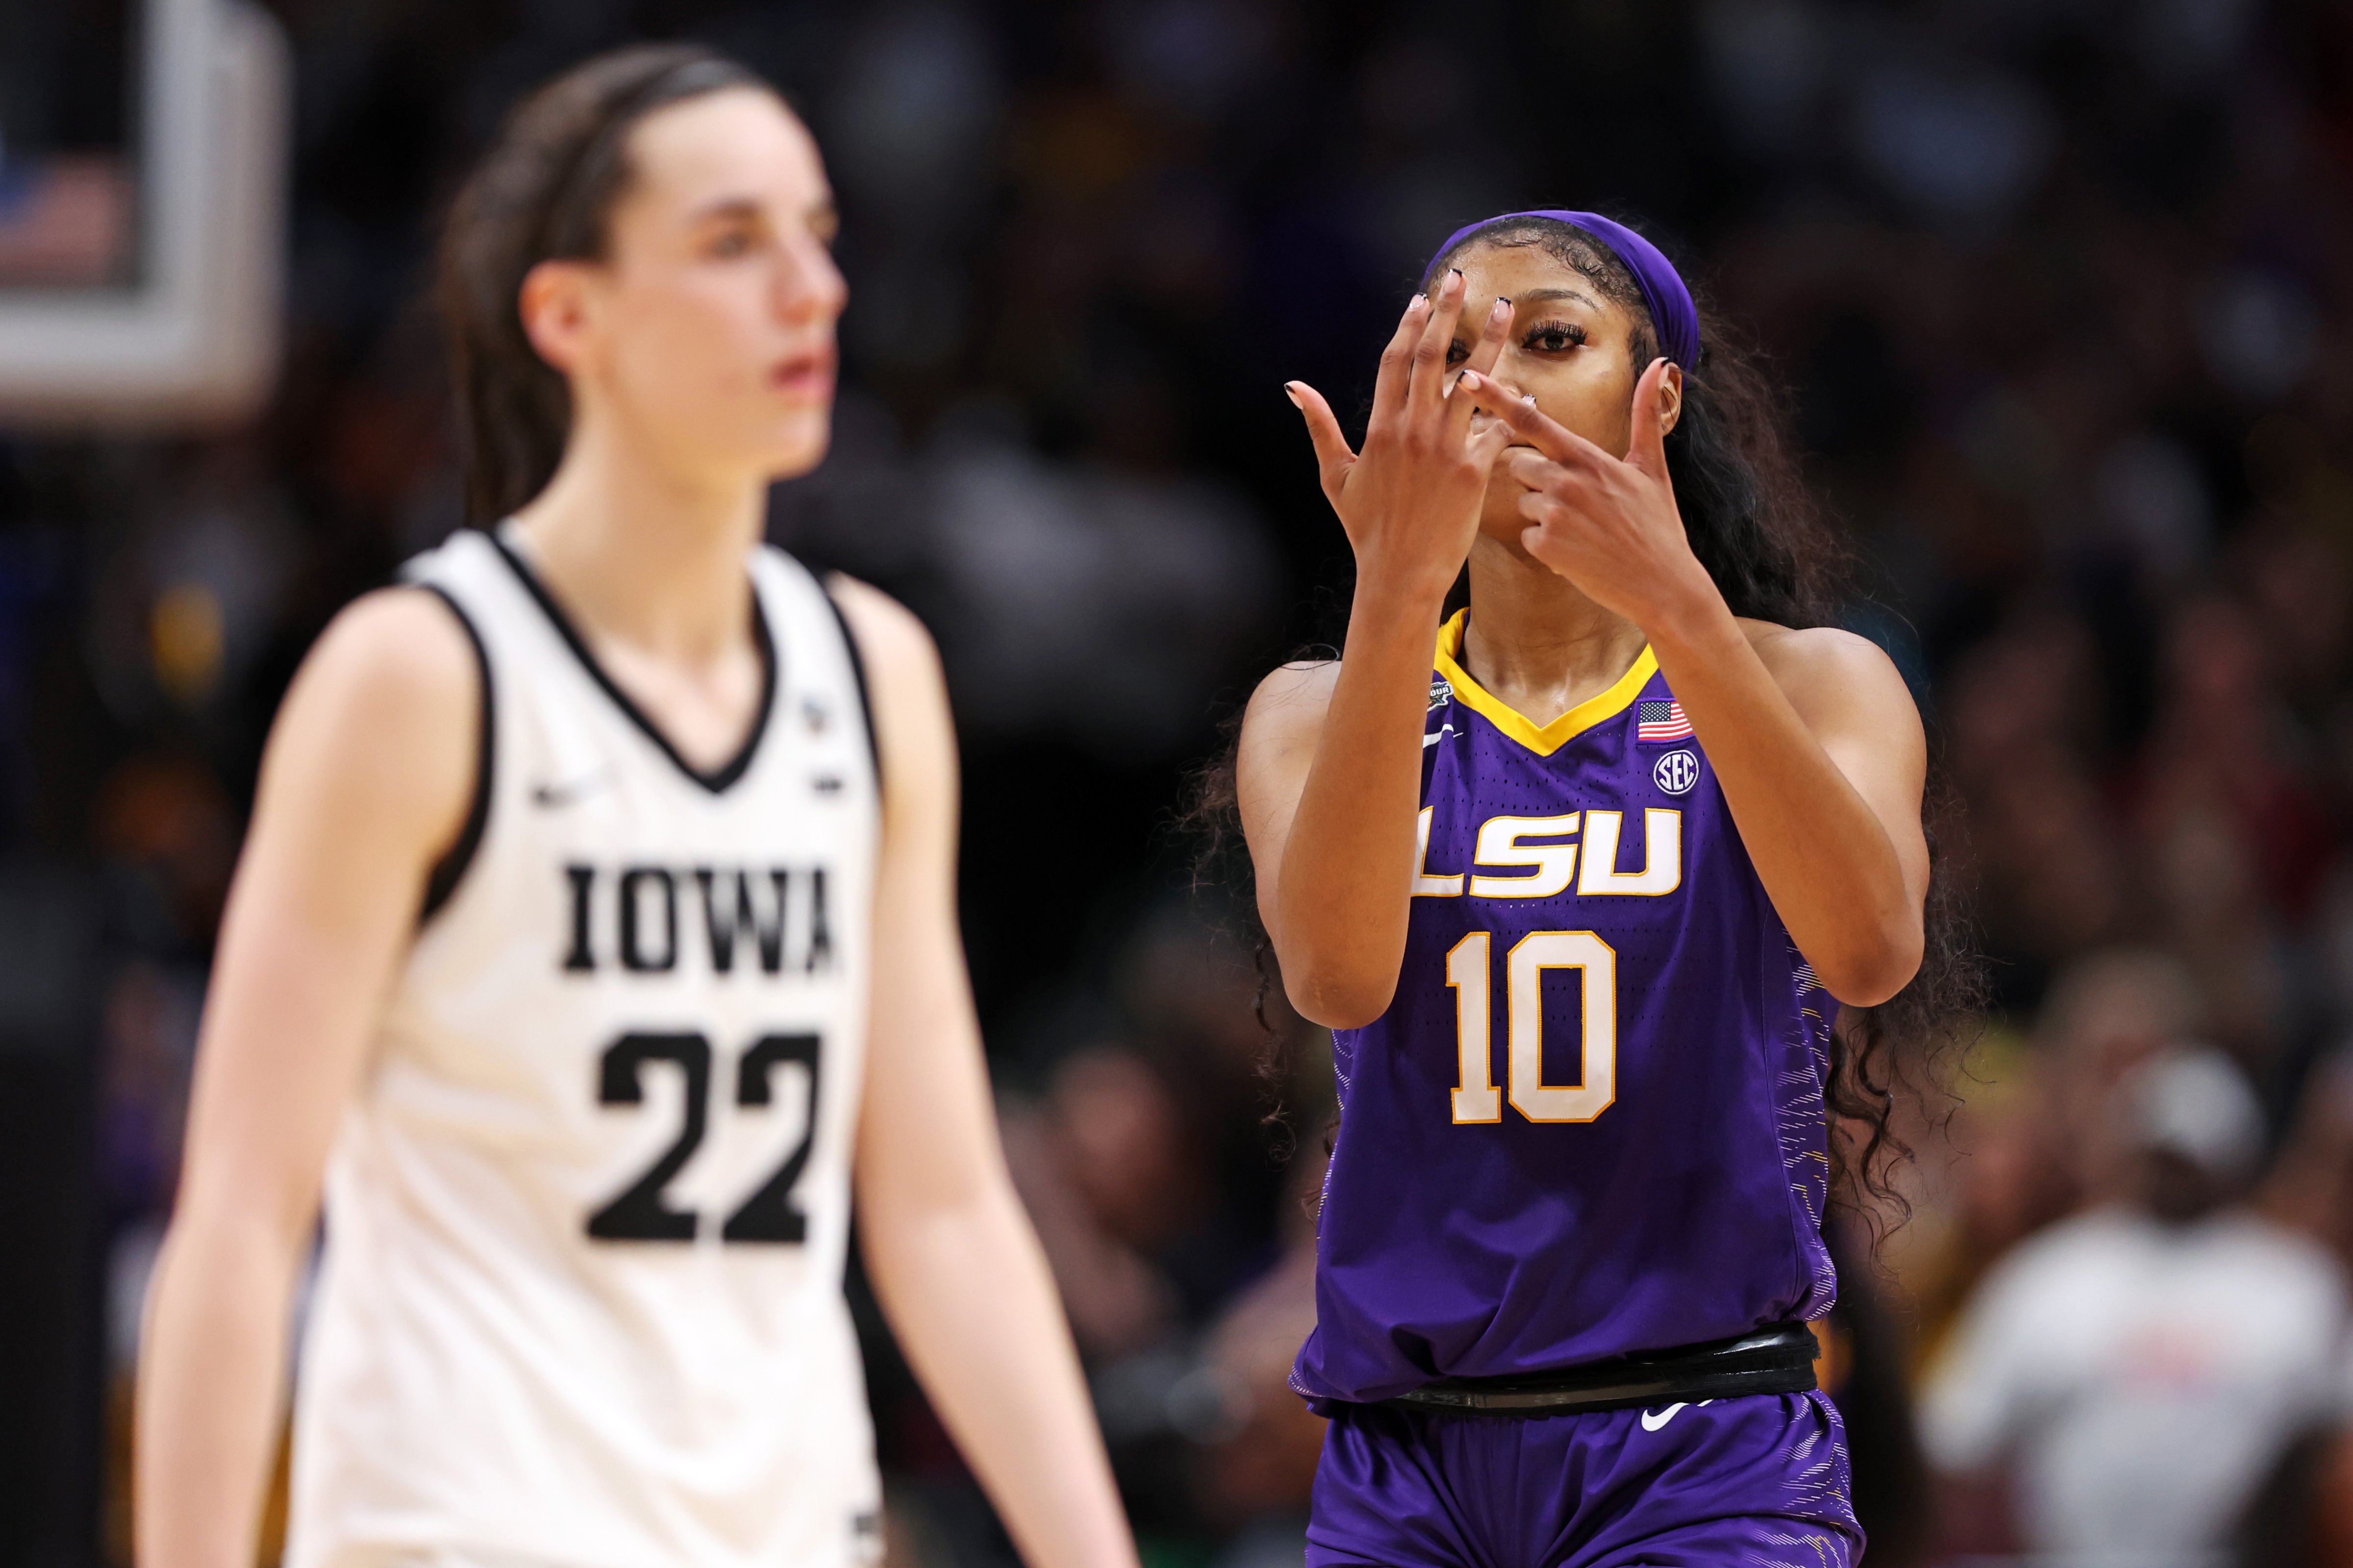 Angel Reese of the LSU Lady Tigers reacts towards Caitlin Clarkof the Iowa Hawkeyes during the fourth quarter during the 2023 NCAA Women’s Basketball Tournament championship game at American Airlines Center in Dallas on April 2, 2023. (Maddie Meyer—Getty Images)